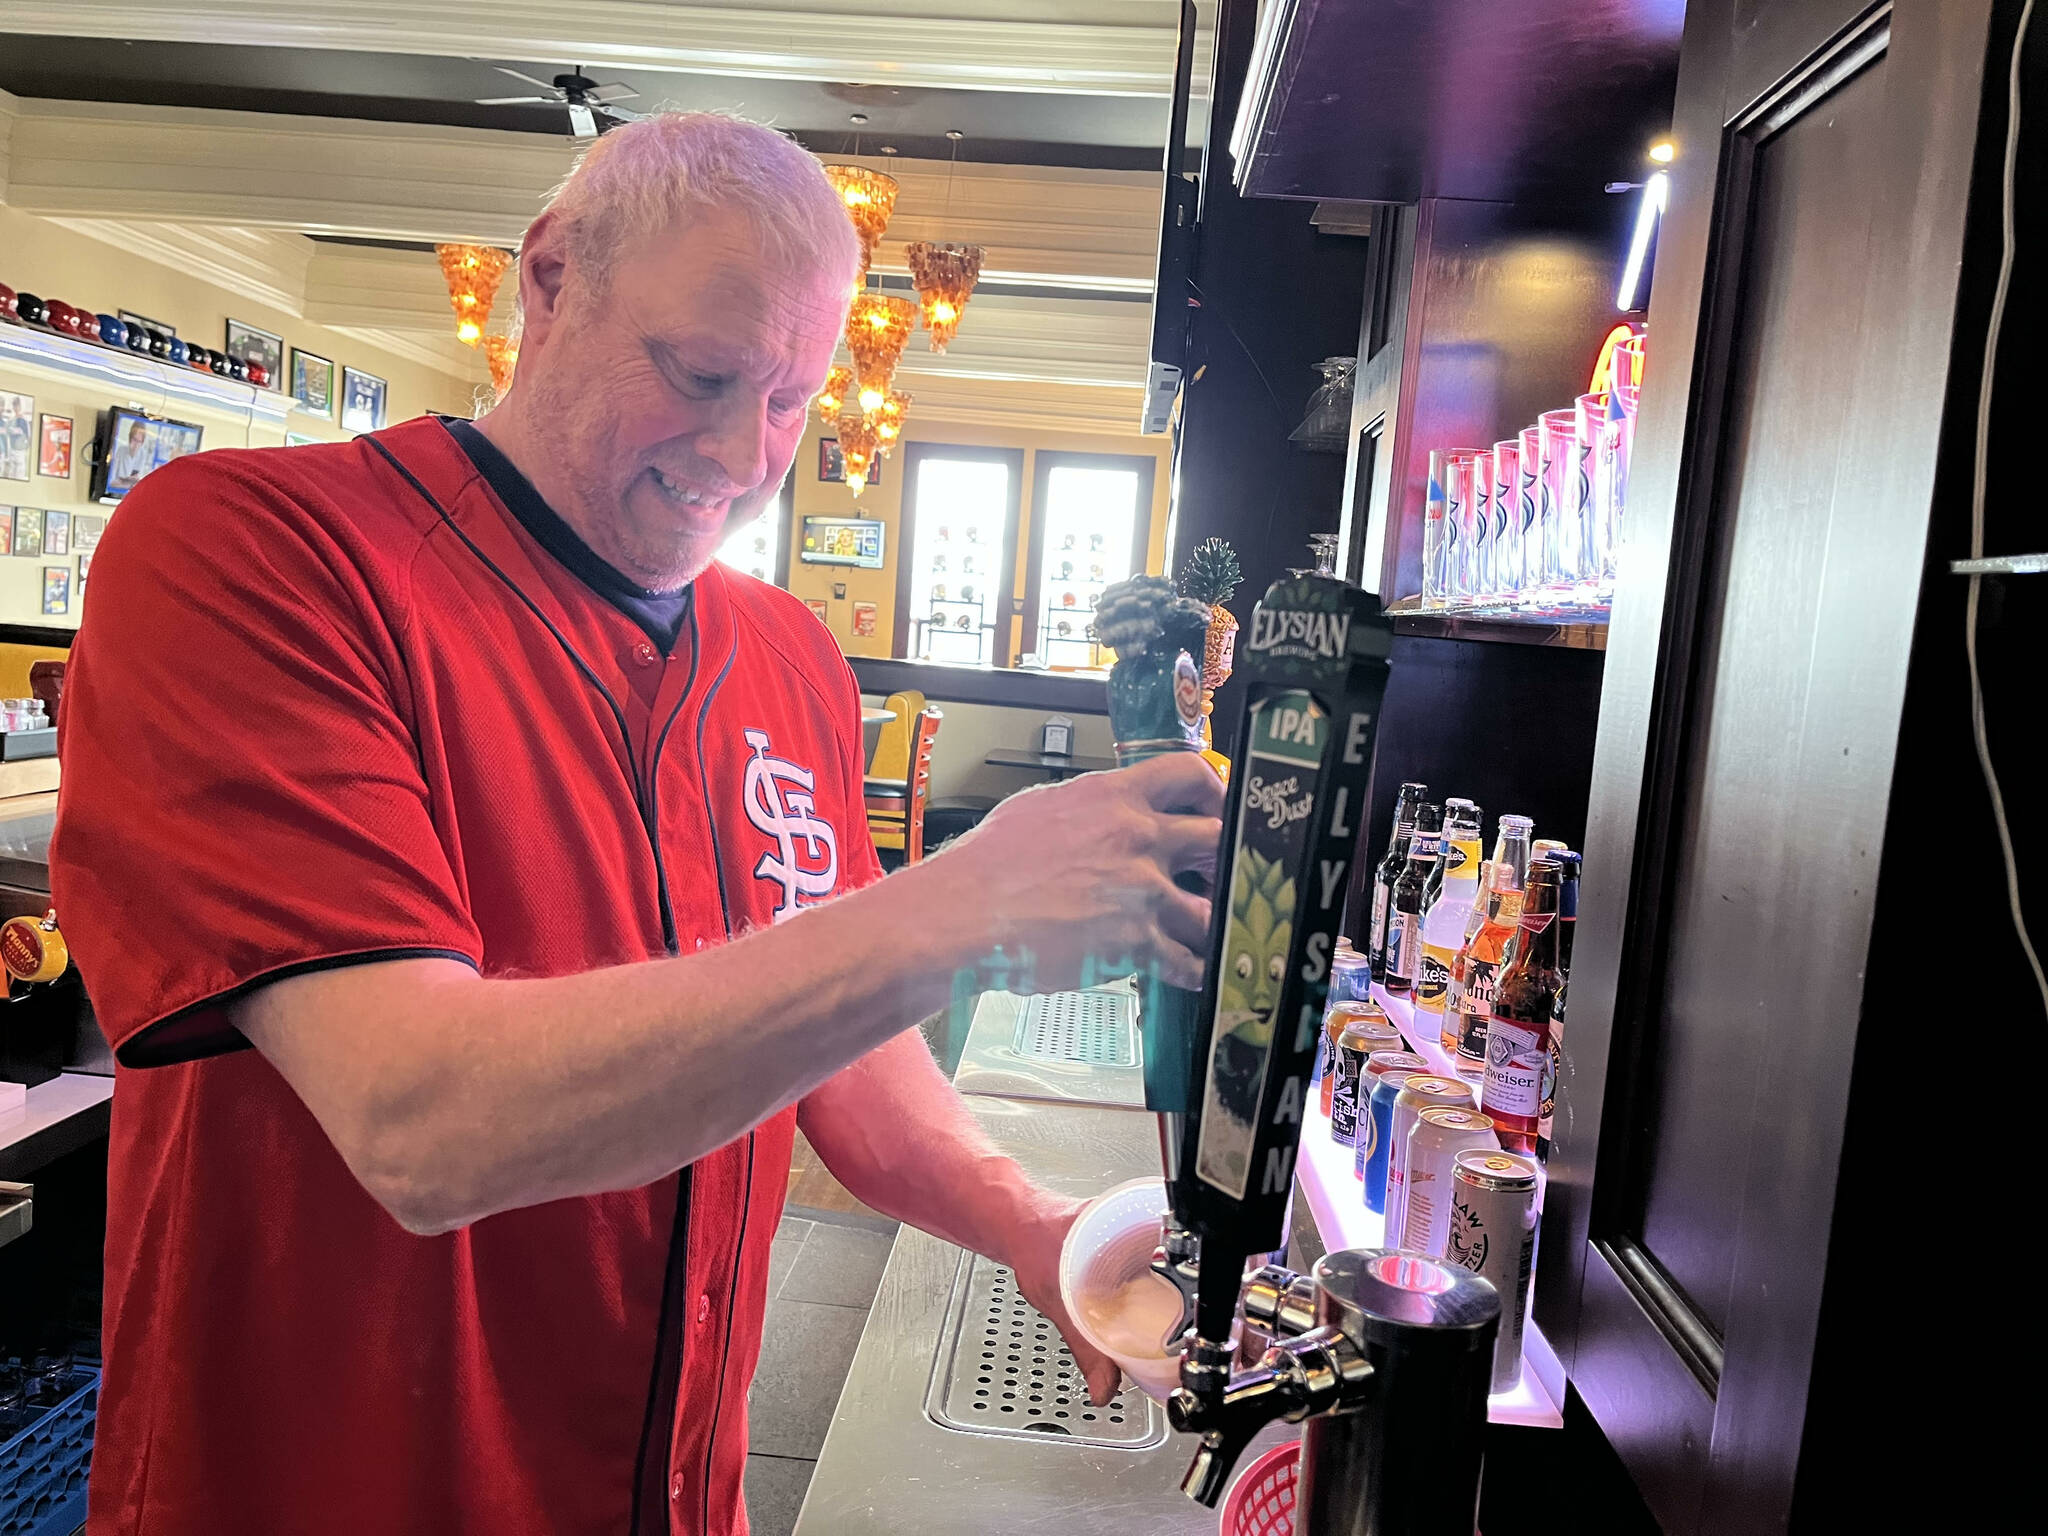 Matthew N. Wells | The Daily World
Tom Sutera, owner of Game Day Sports Bar and Grill — 212 S. I St. in Aberdeen — pours a Kona Brewing Big Wave Golden Ale at the start of business late Thursday morning, March 31, 2022.